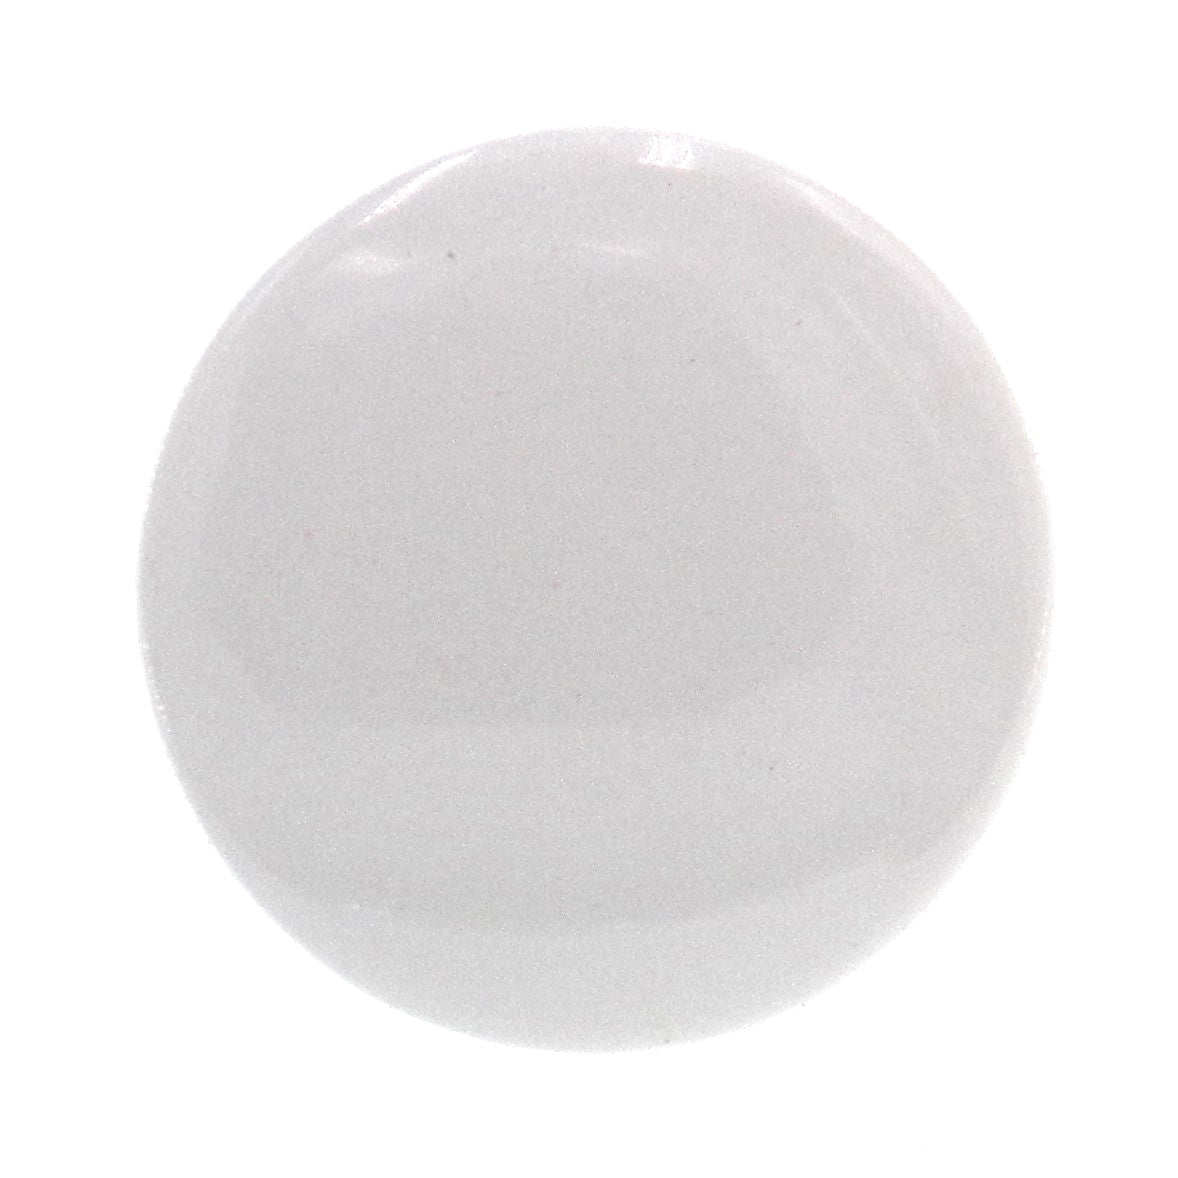 Amerock Forges White 1-3/16" Round Cabinet Knob B312-B-W Made in Italy